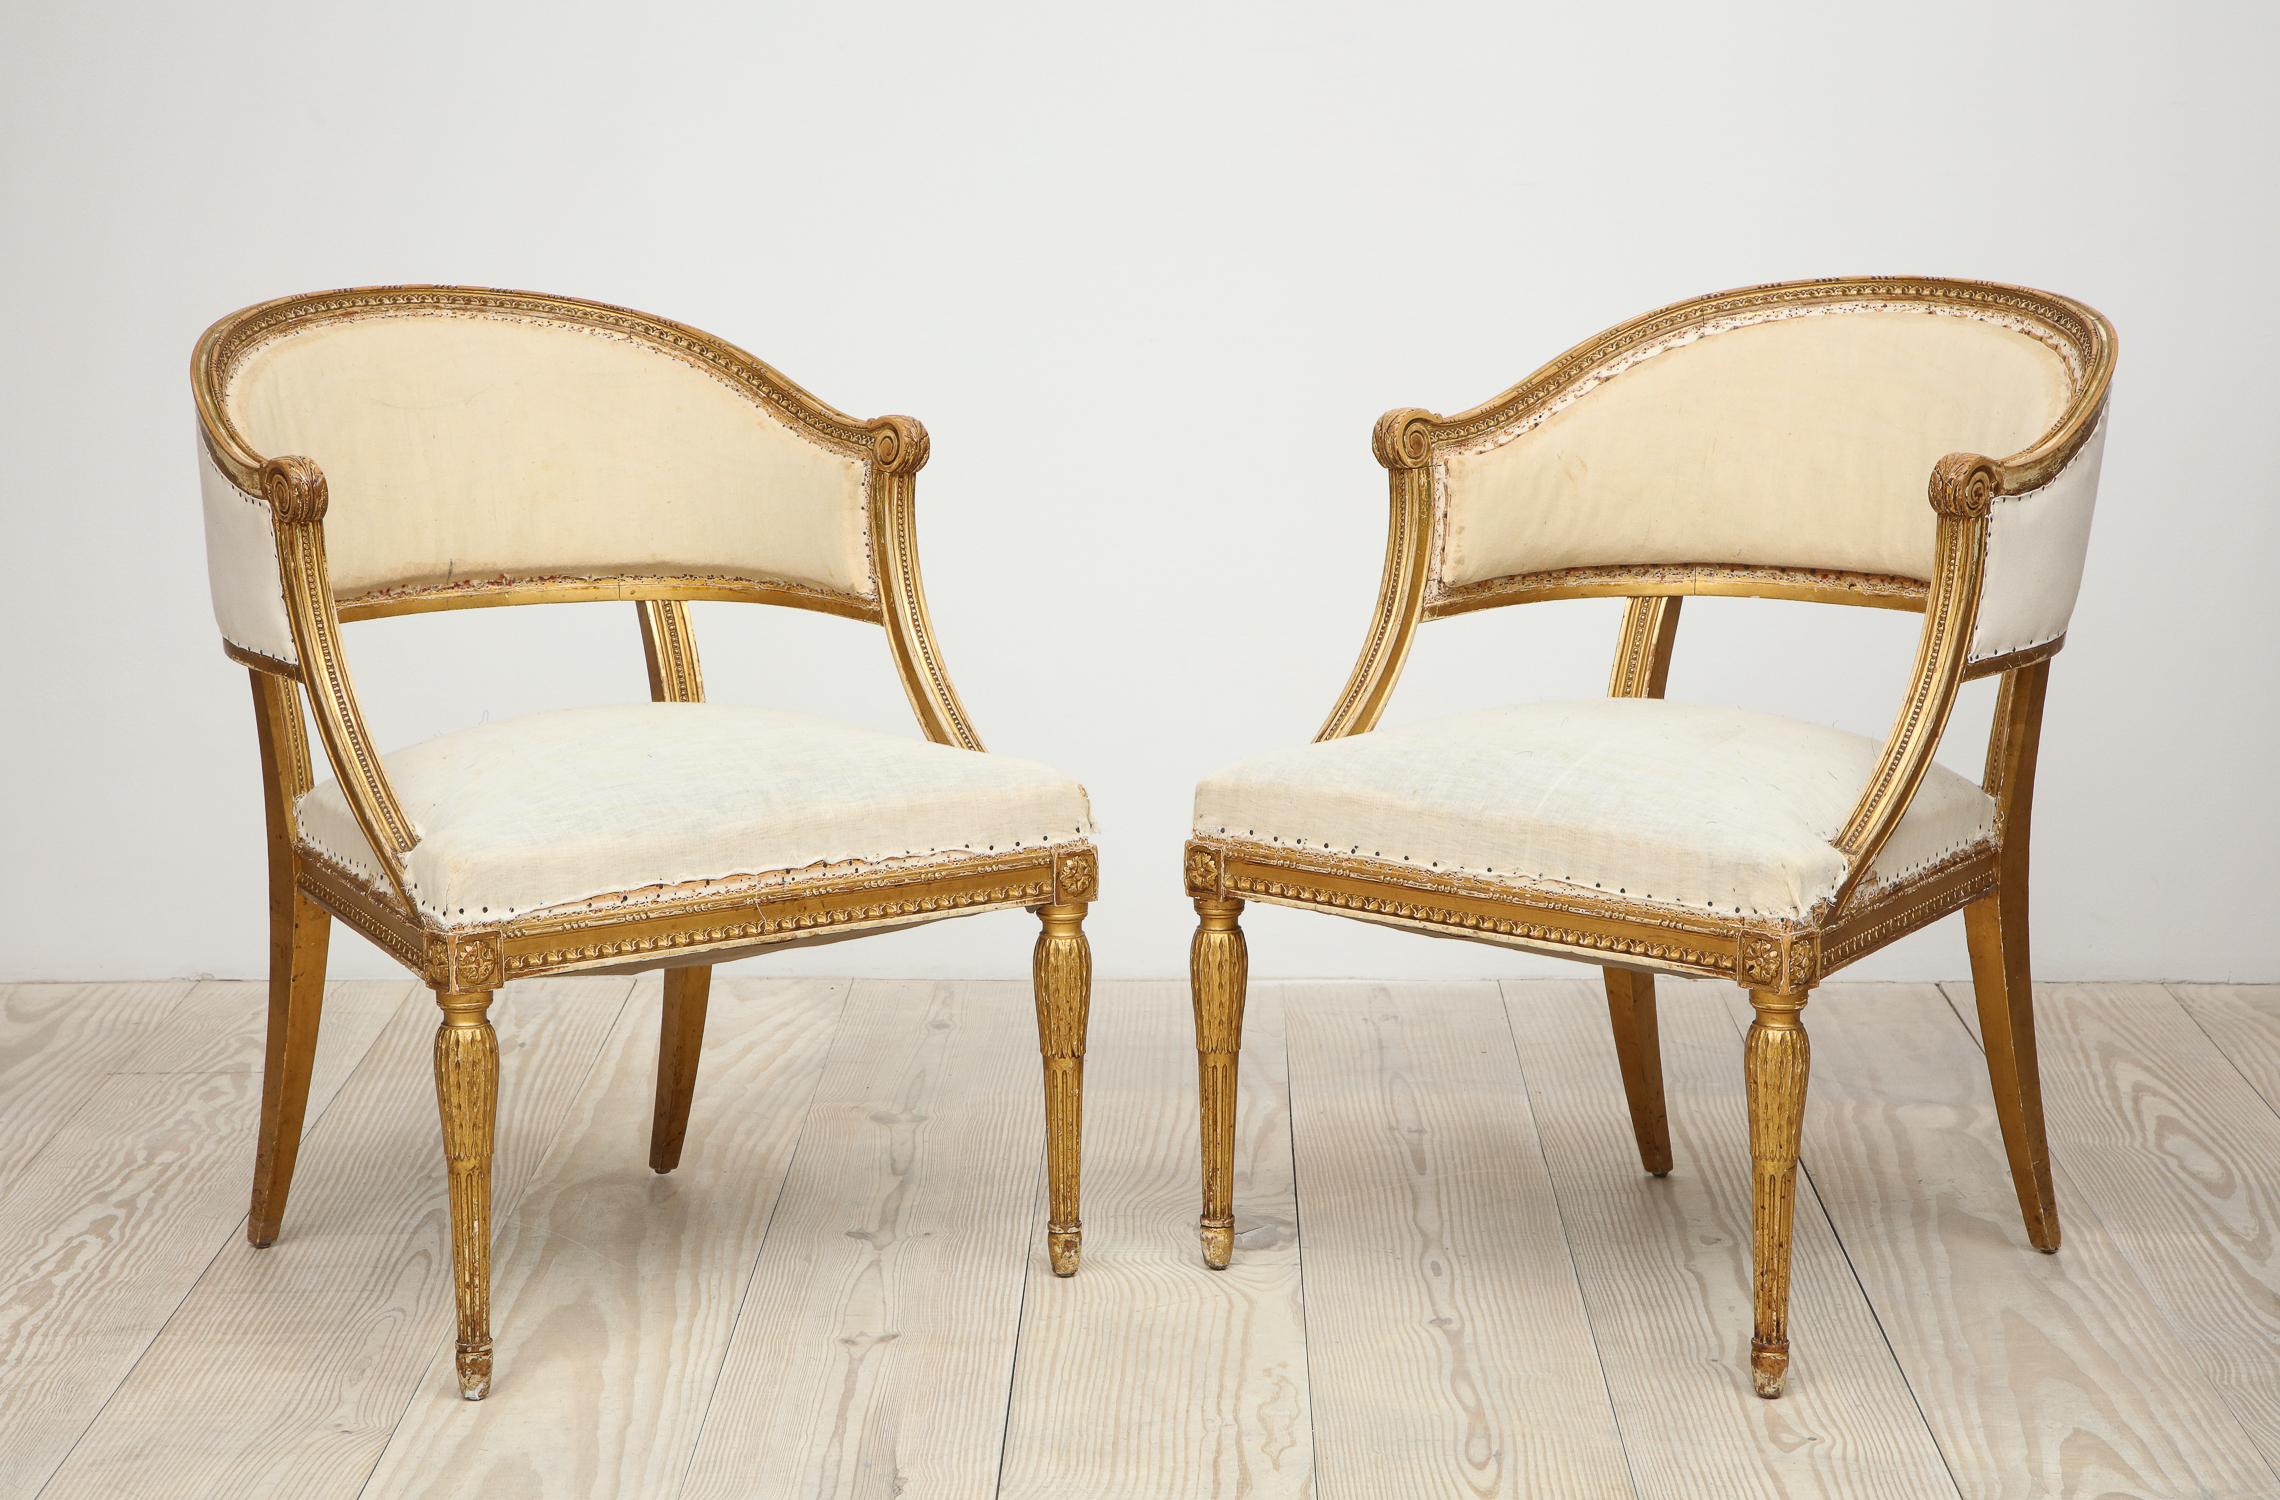 18th Century Giltwood Gustavian Bucket Chairs, Set of 4, Sweden, Circa 1790-1800 For Sale 6